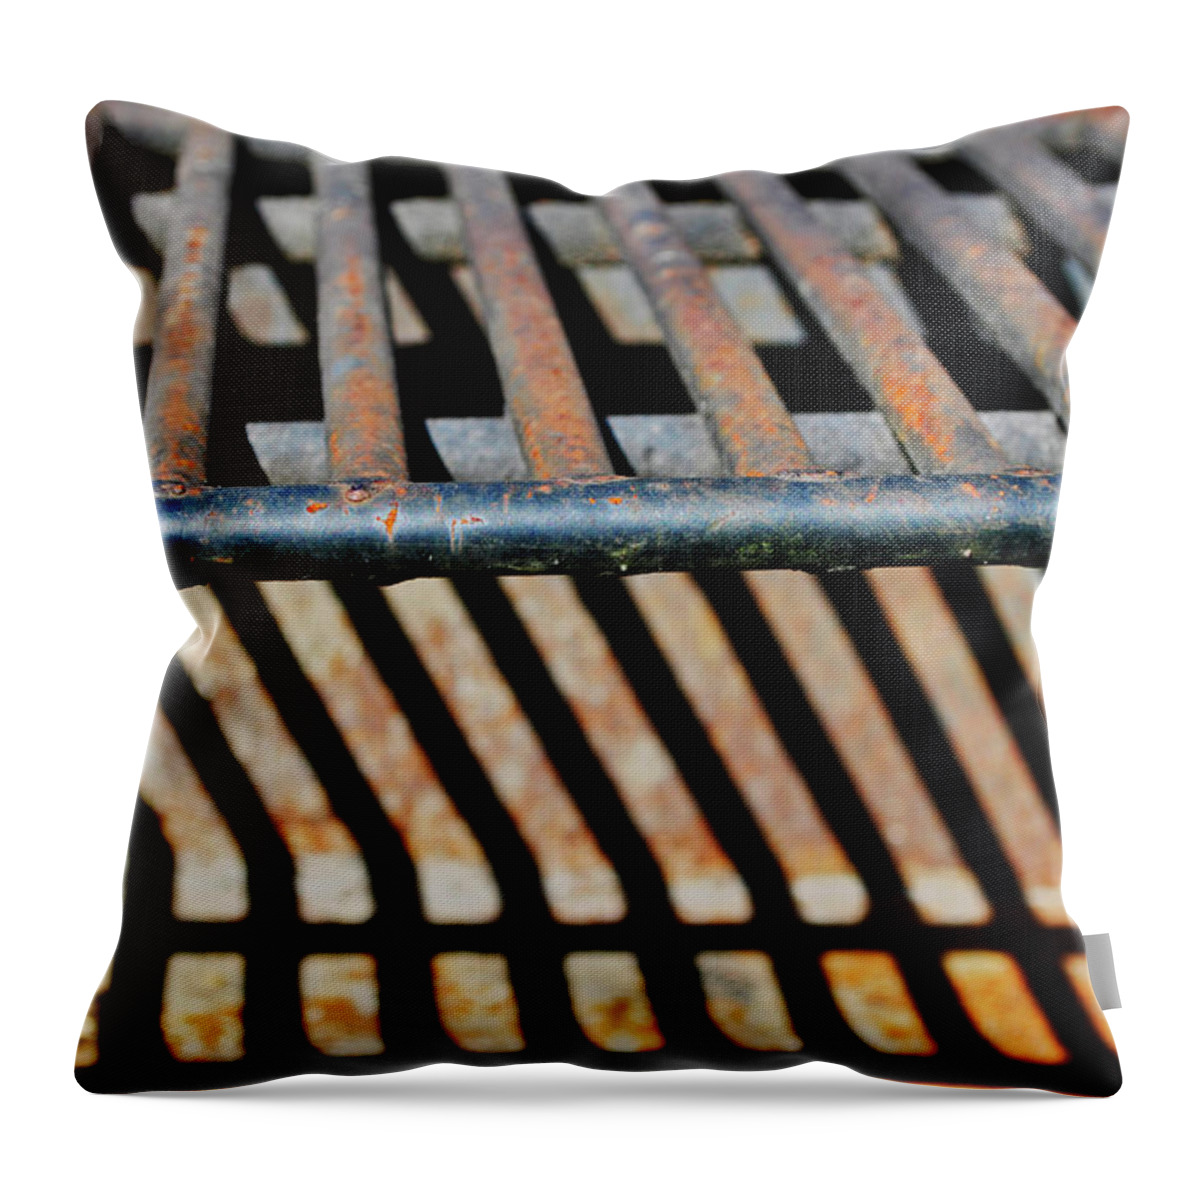 Grill Throw Pillow featuring the photograph Grilled by Tikvah's Hope